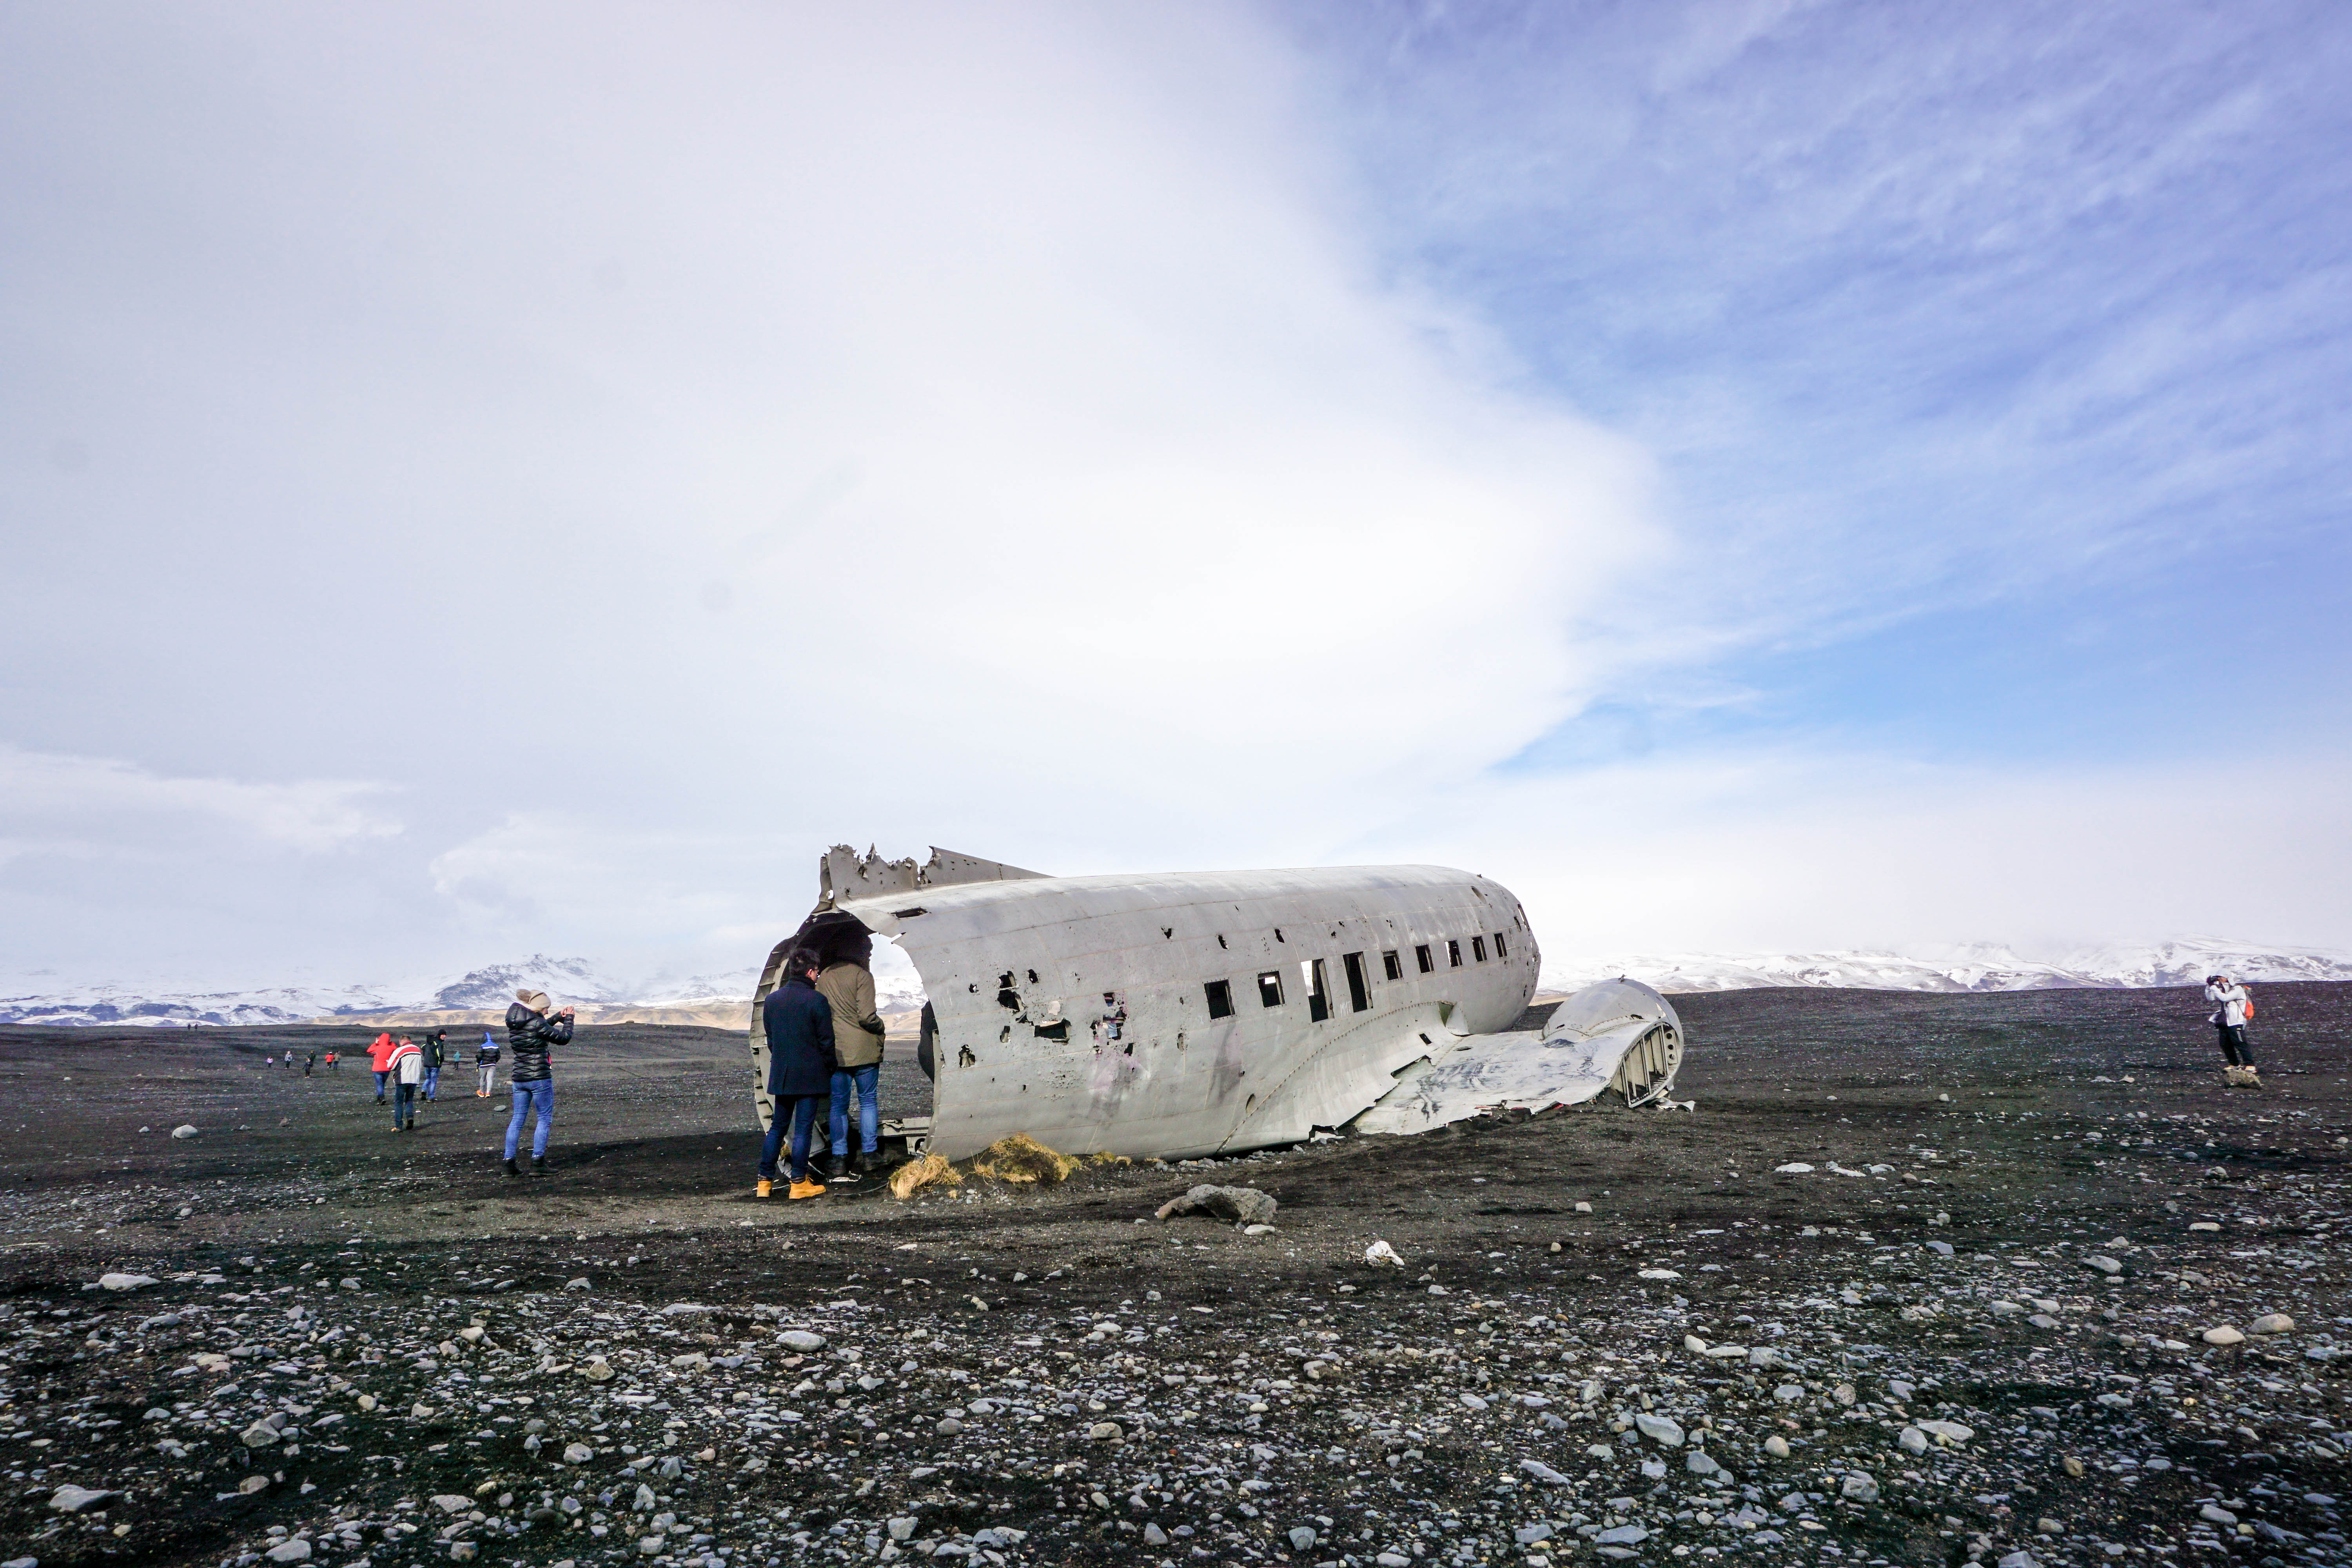 he plane wreck on Solheimasandur black sand beach in South Iceland has become a photographers dream! So glad I got to see it in person, even after the windy 45 minute walk on the beach | Life With a View